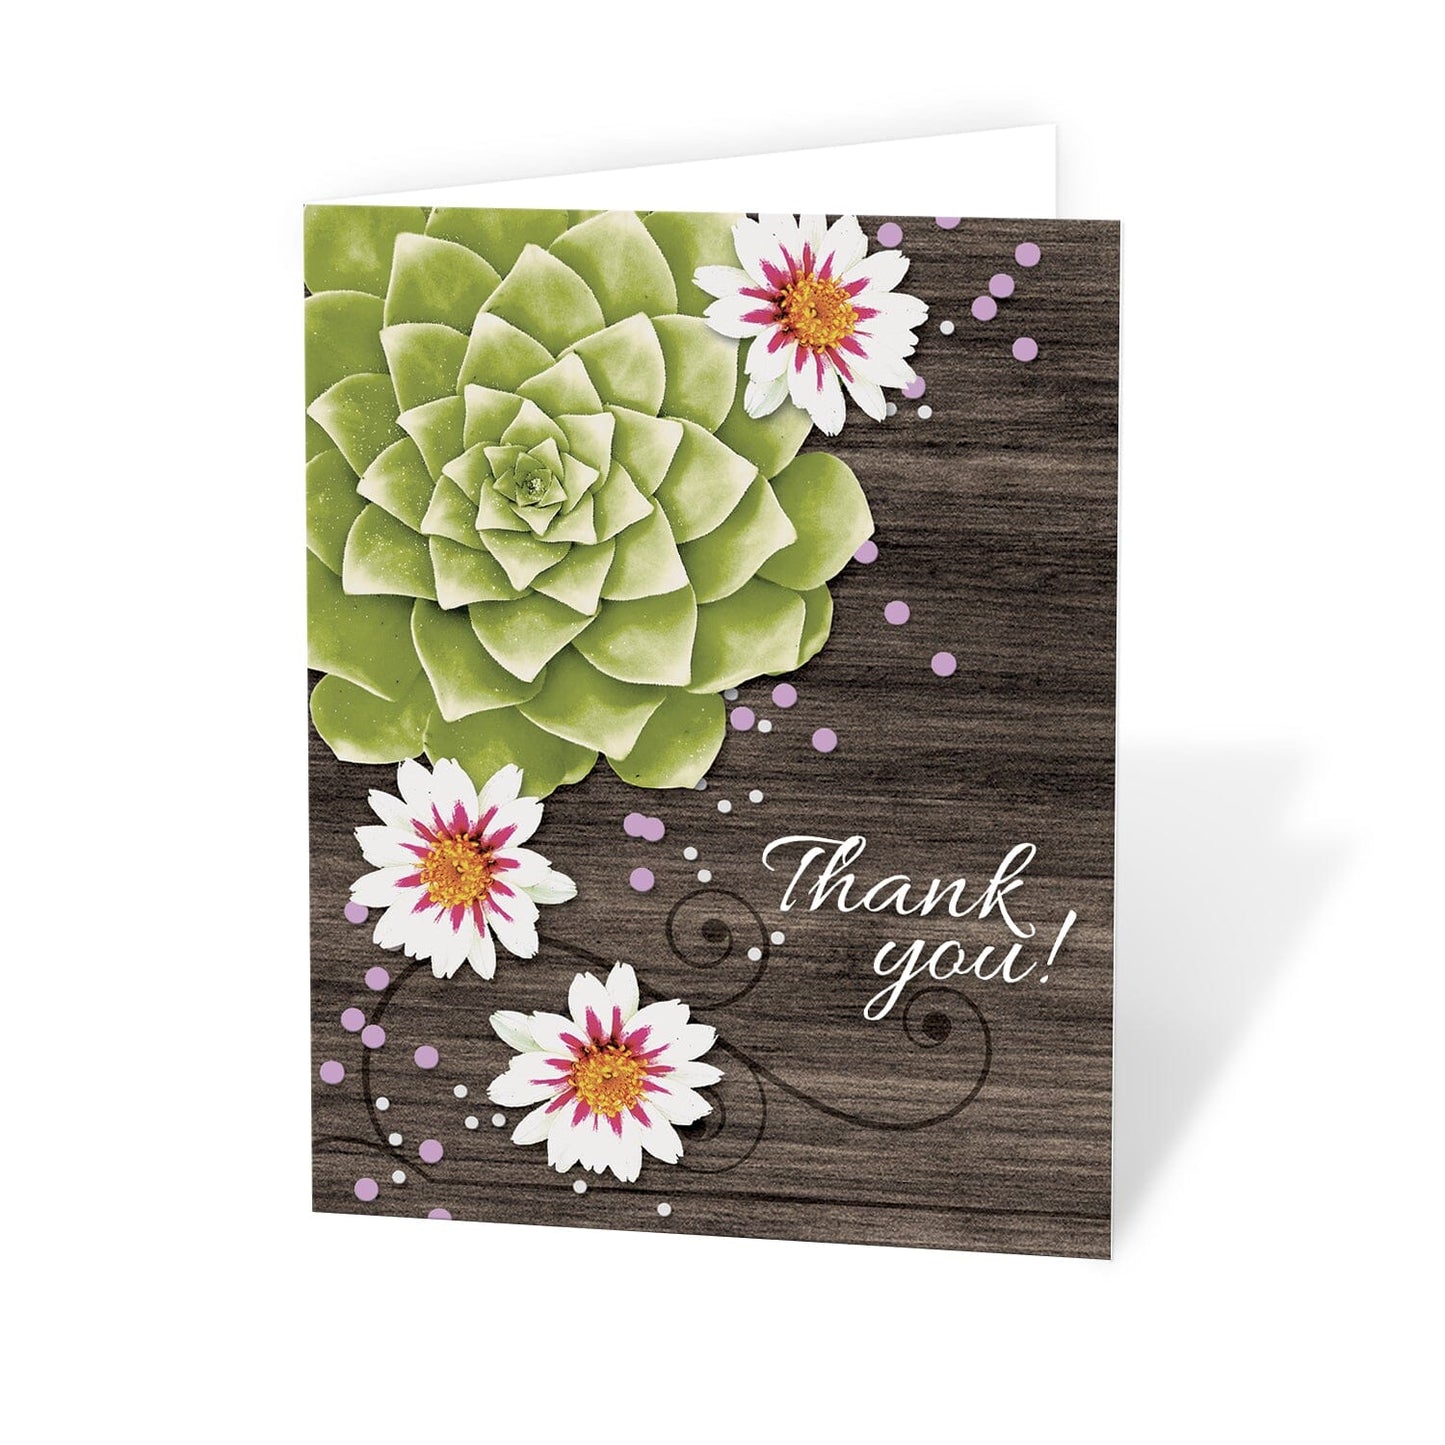 Succulent Rustic Floral Wood Thank You Cards (with purple accents) at Artistically Invited. 